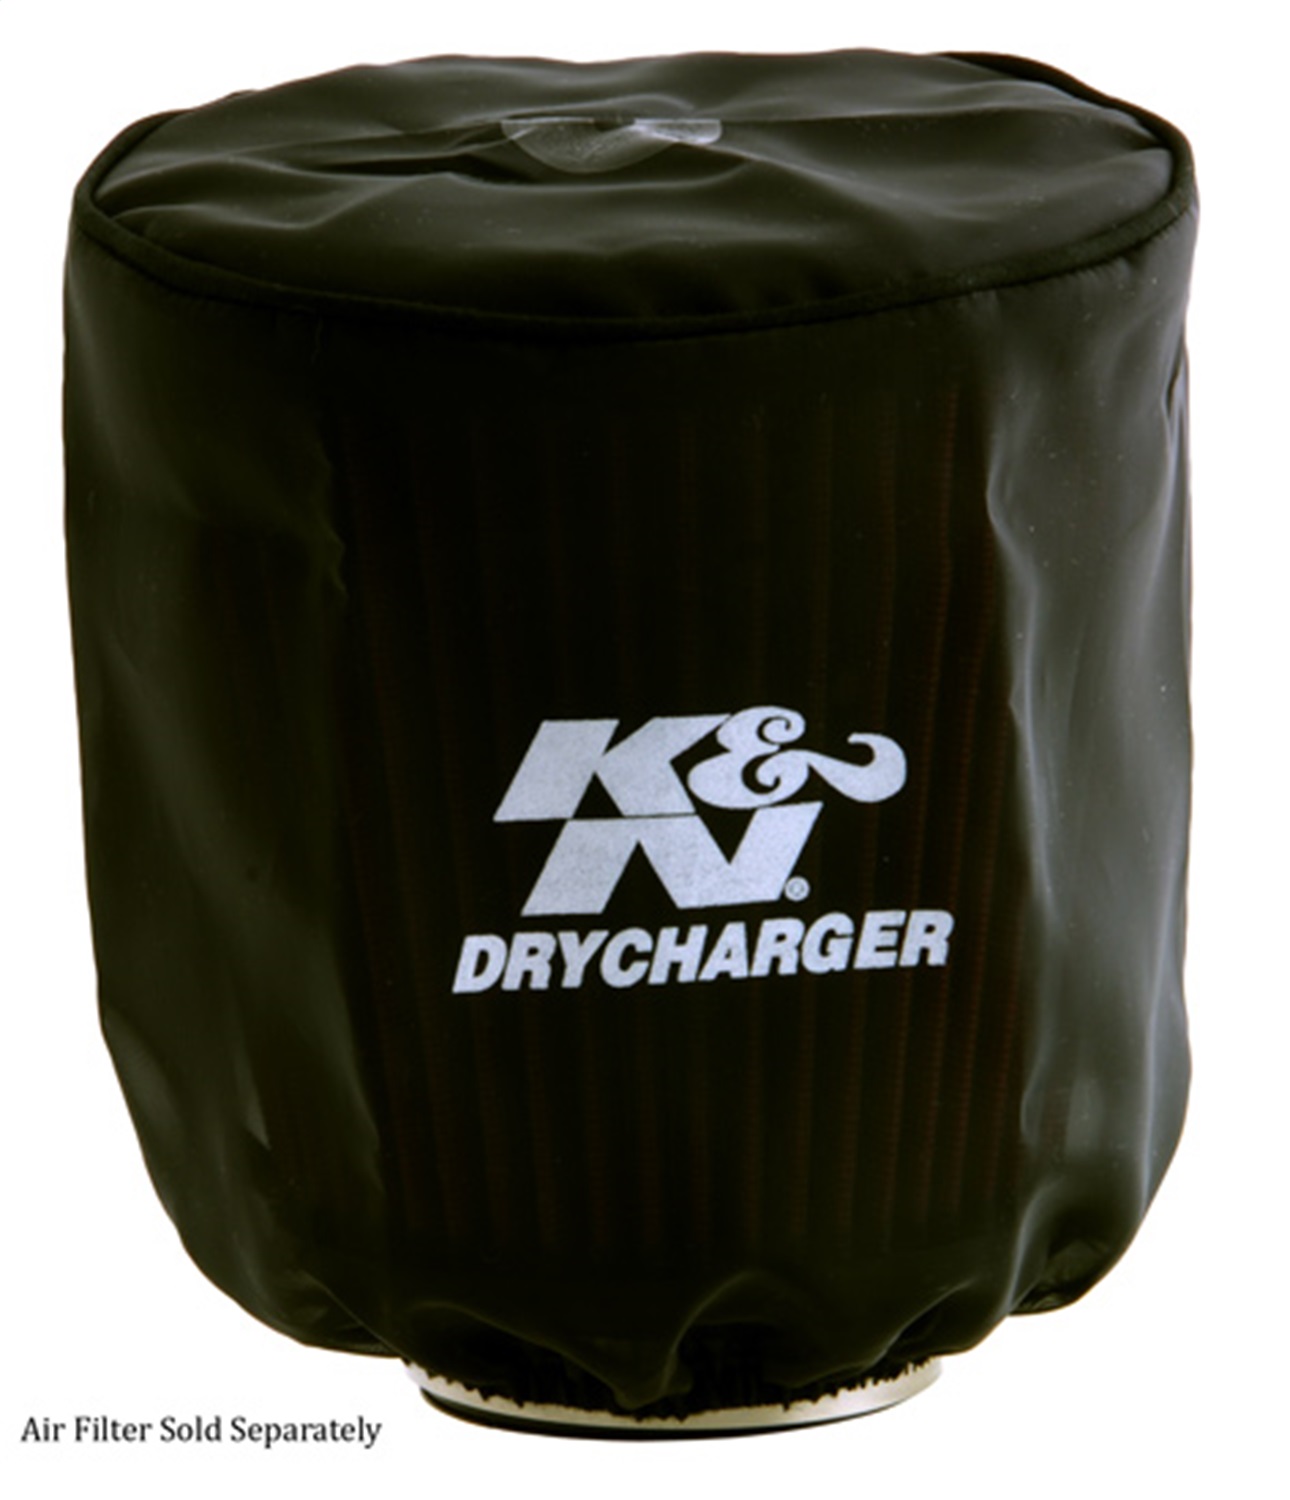 K&N Filters K&N Filters RX-3810DK DryCharger Filter Wrap